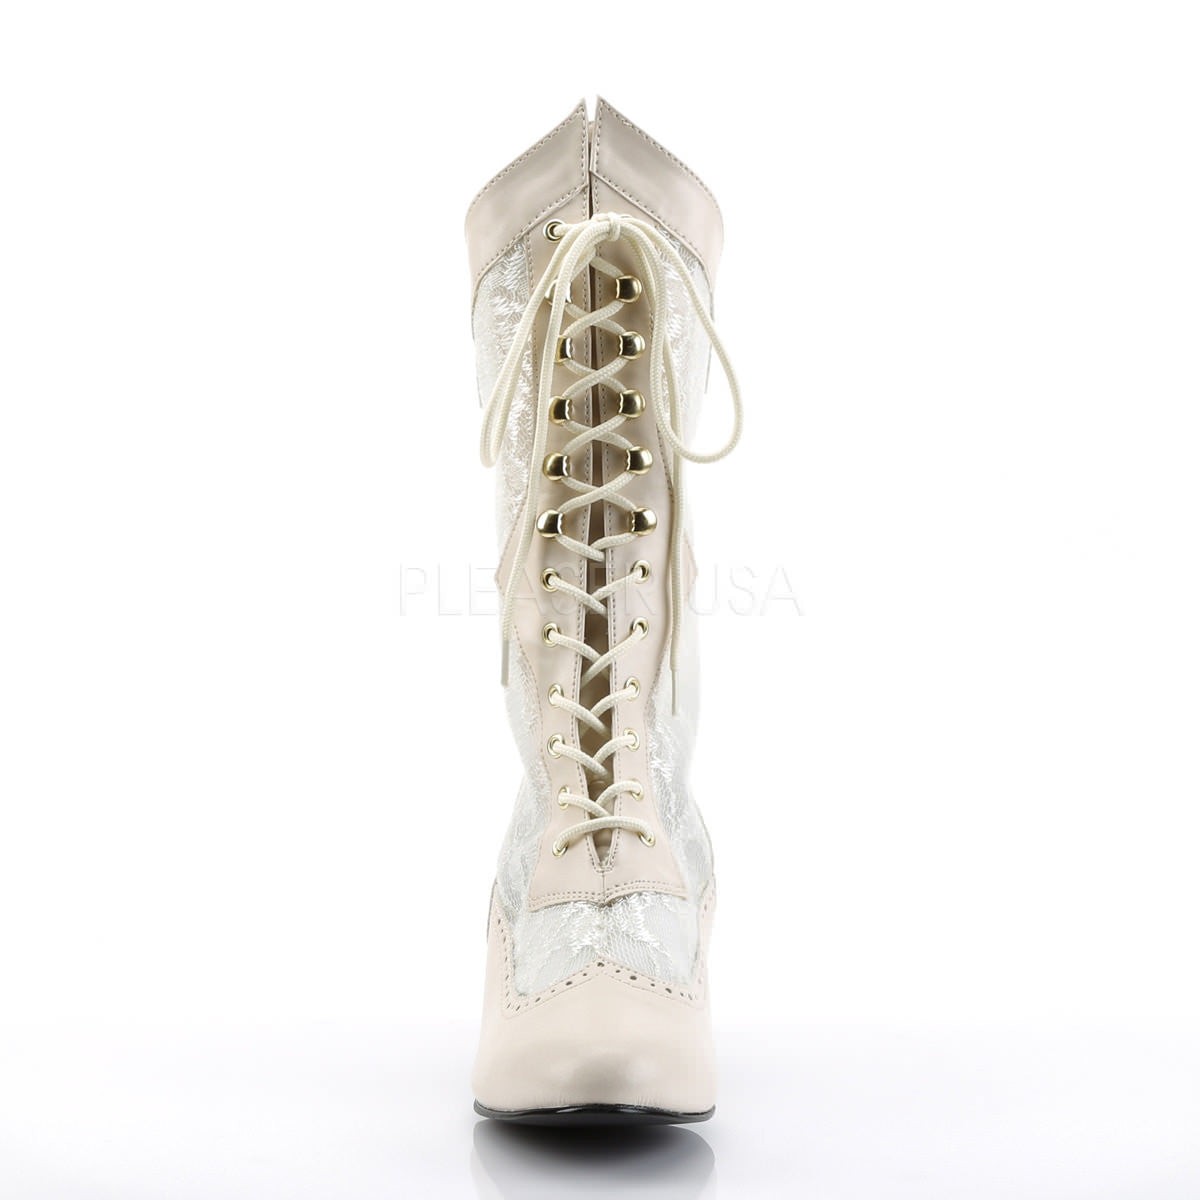 Funtasma Women's 2 Heel Lace Victorian Ankle Boots, Ivory Pu-Lace, 10